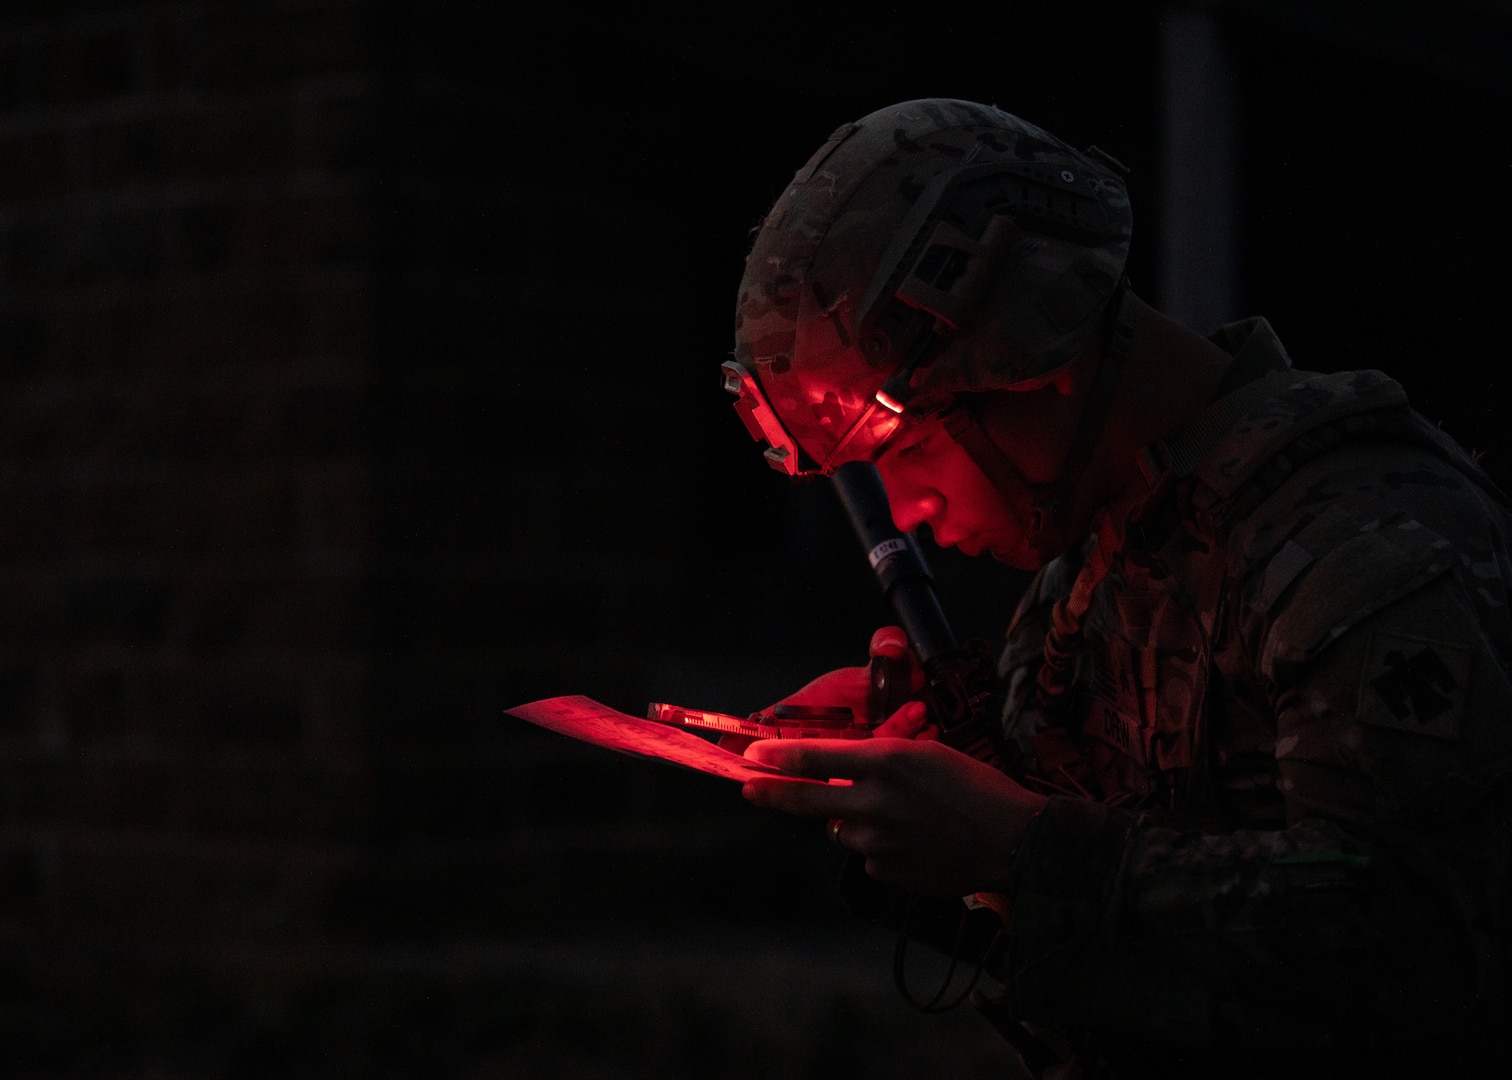 Oklahoma Army National Guard Soldier plots points on a map during the night land navigation challenge of the Best Warrior Competition at Camp Gruber Training Center, Oklahoma, March 4, 2022. (Oklahoma National Guard photo by Spc. Danielle Rayon)